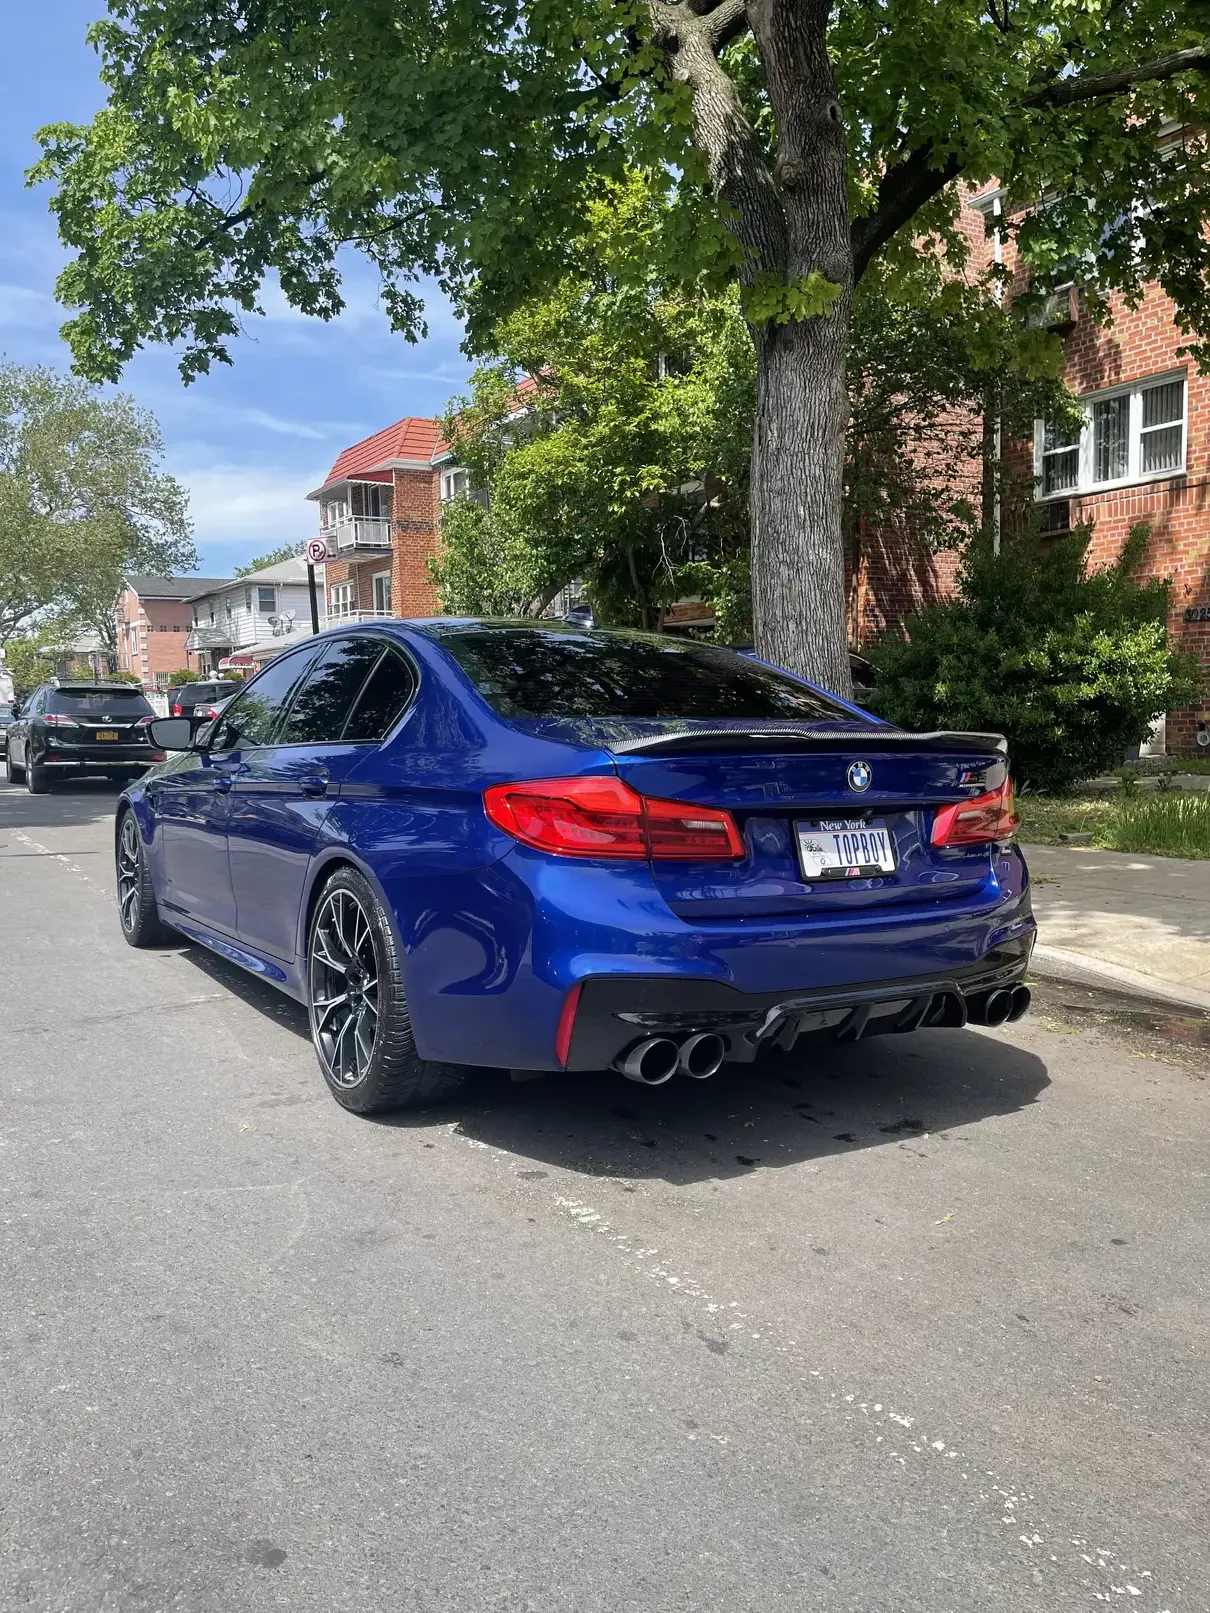 Blue bmw m5 rear picture from far after cleaning.